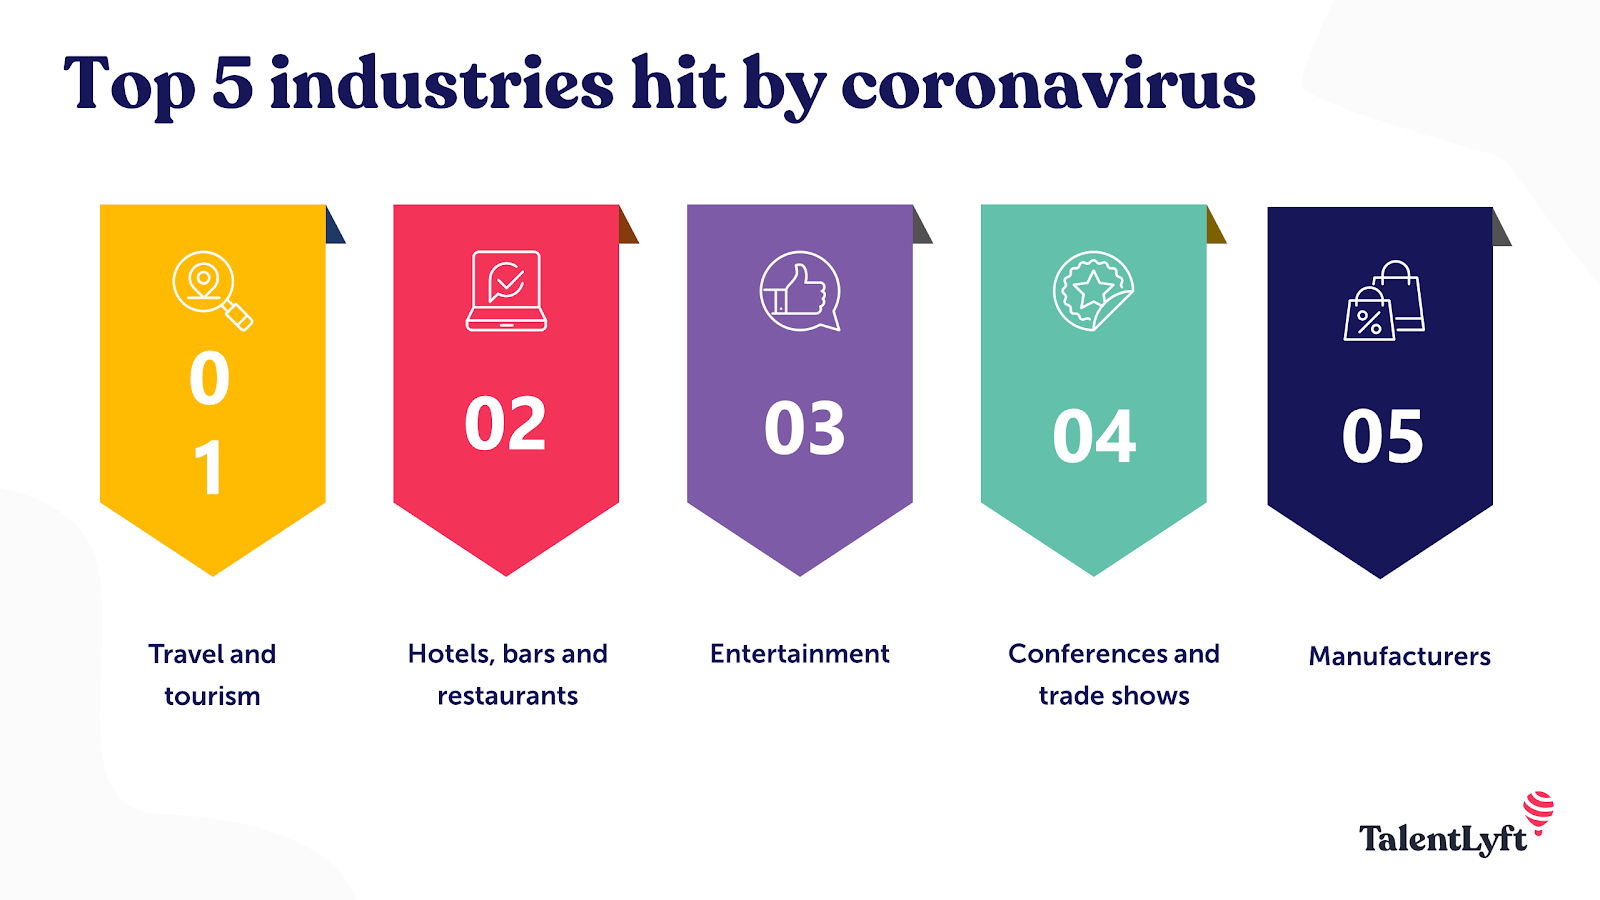 Industries that are more susceptible to coronavirus economic impacts